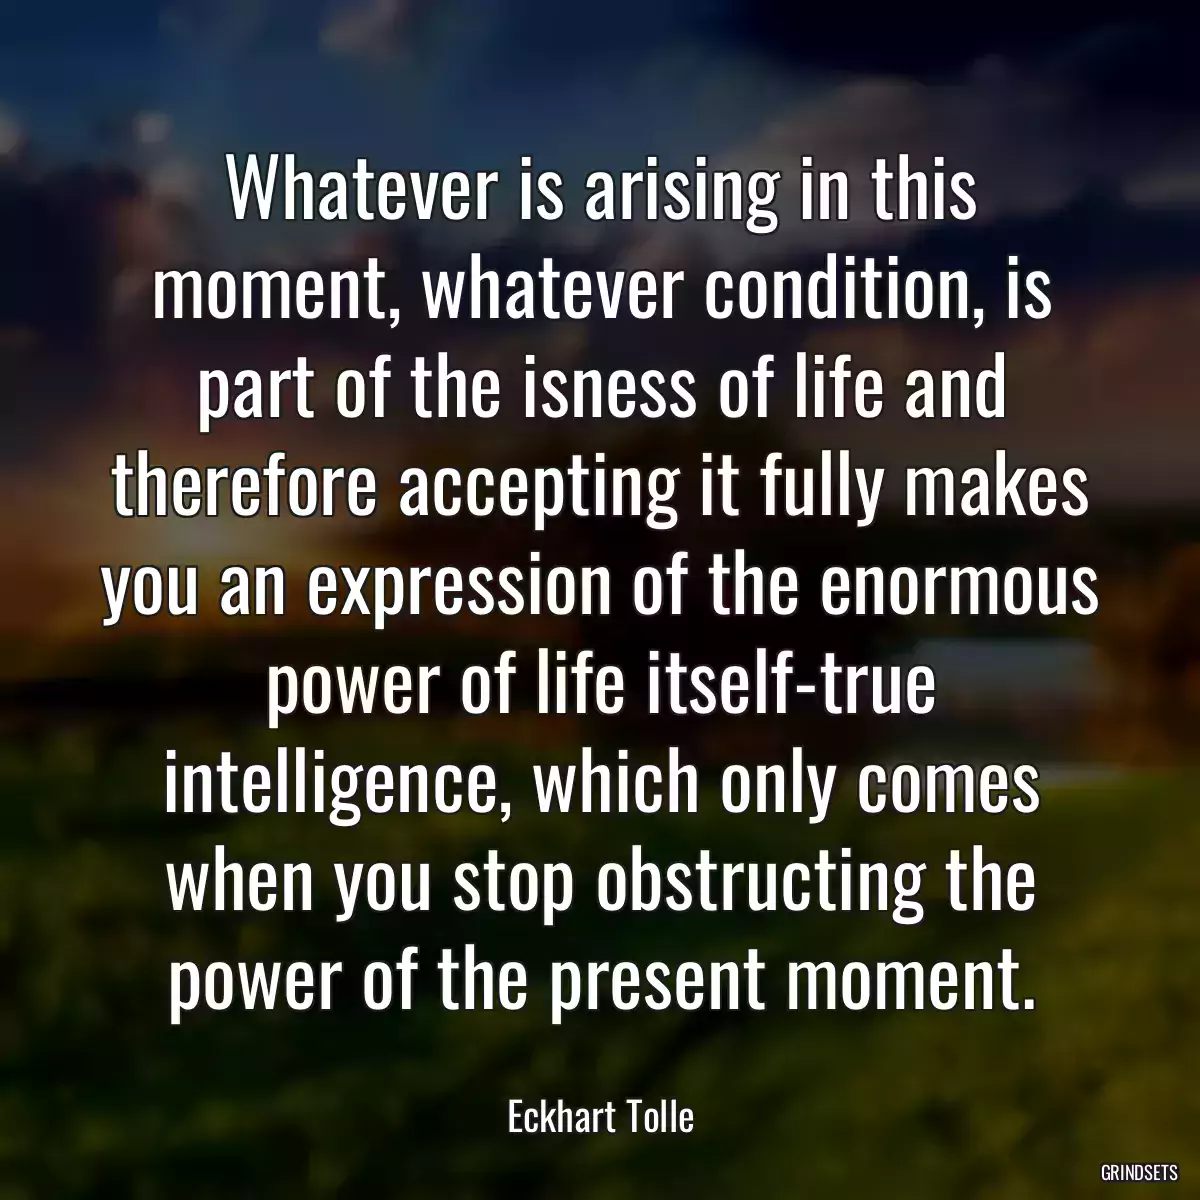 Whatever is arising in this moment, whatever condition, is part of the isness of life and therefore accepting it fully makes you an expression of the enormous power of life itself-true intelligence, which only comes when you stop obstructing the power of the present moment.